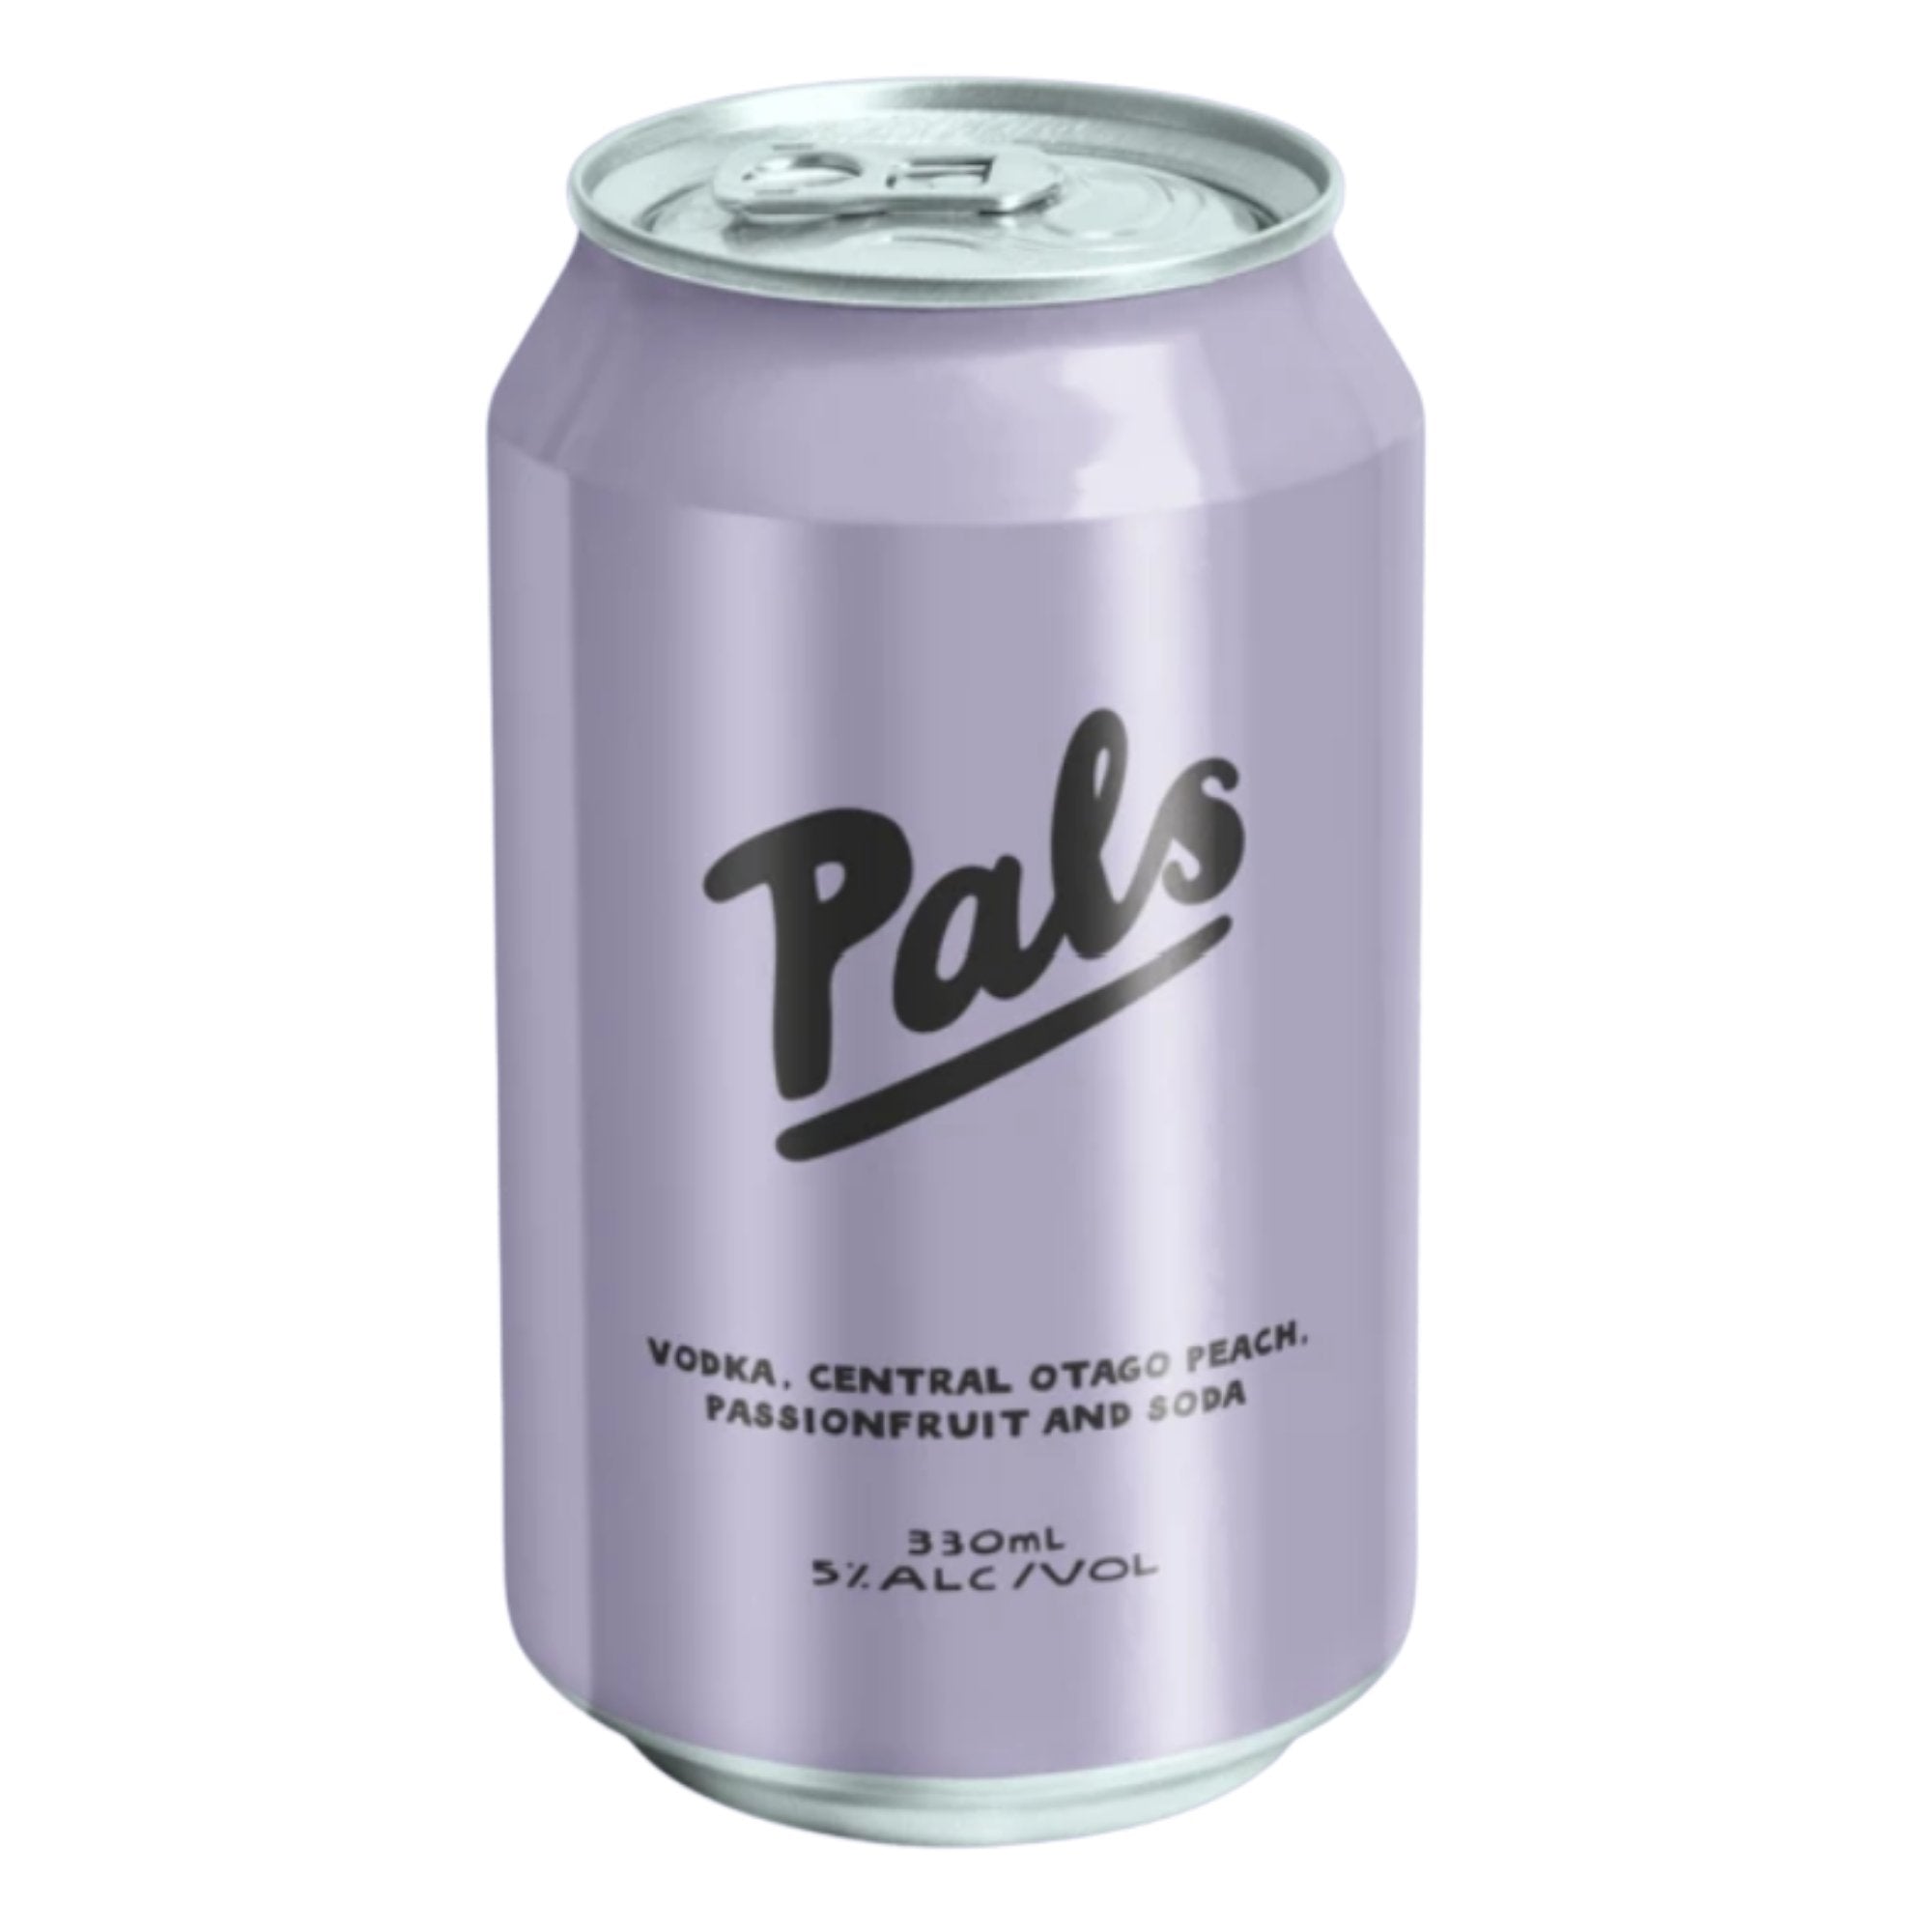 Pals Vodka, Peach, Central Otago Peach, Passionfruit and Soda - Beautiful Gifts - Packaged with Love